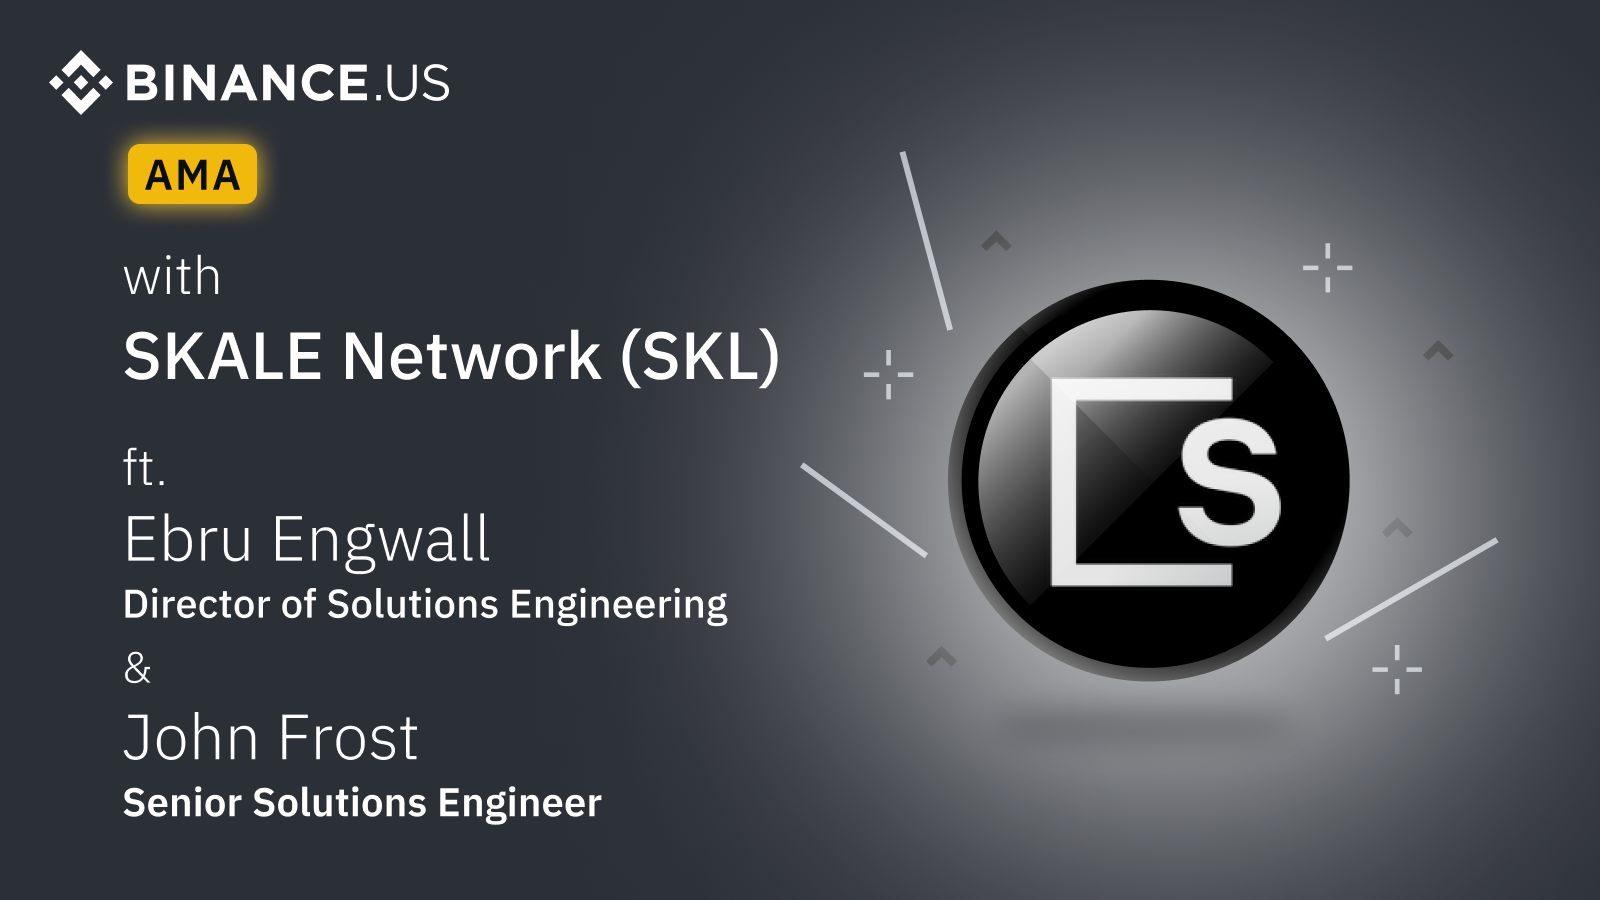 AMA with SKALE Network (SKL) feat. Solutions Engineers Ebru Engwall & John Frost